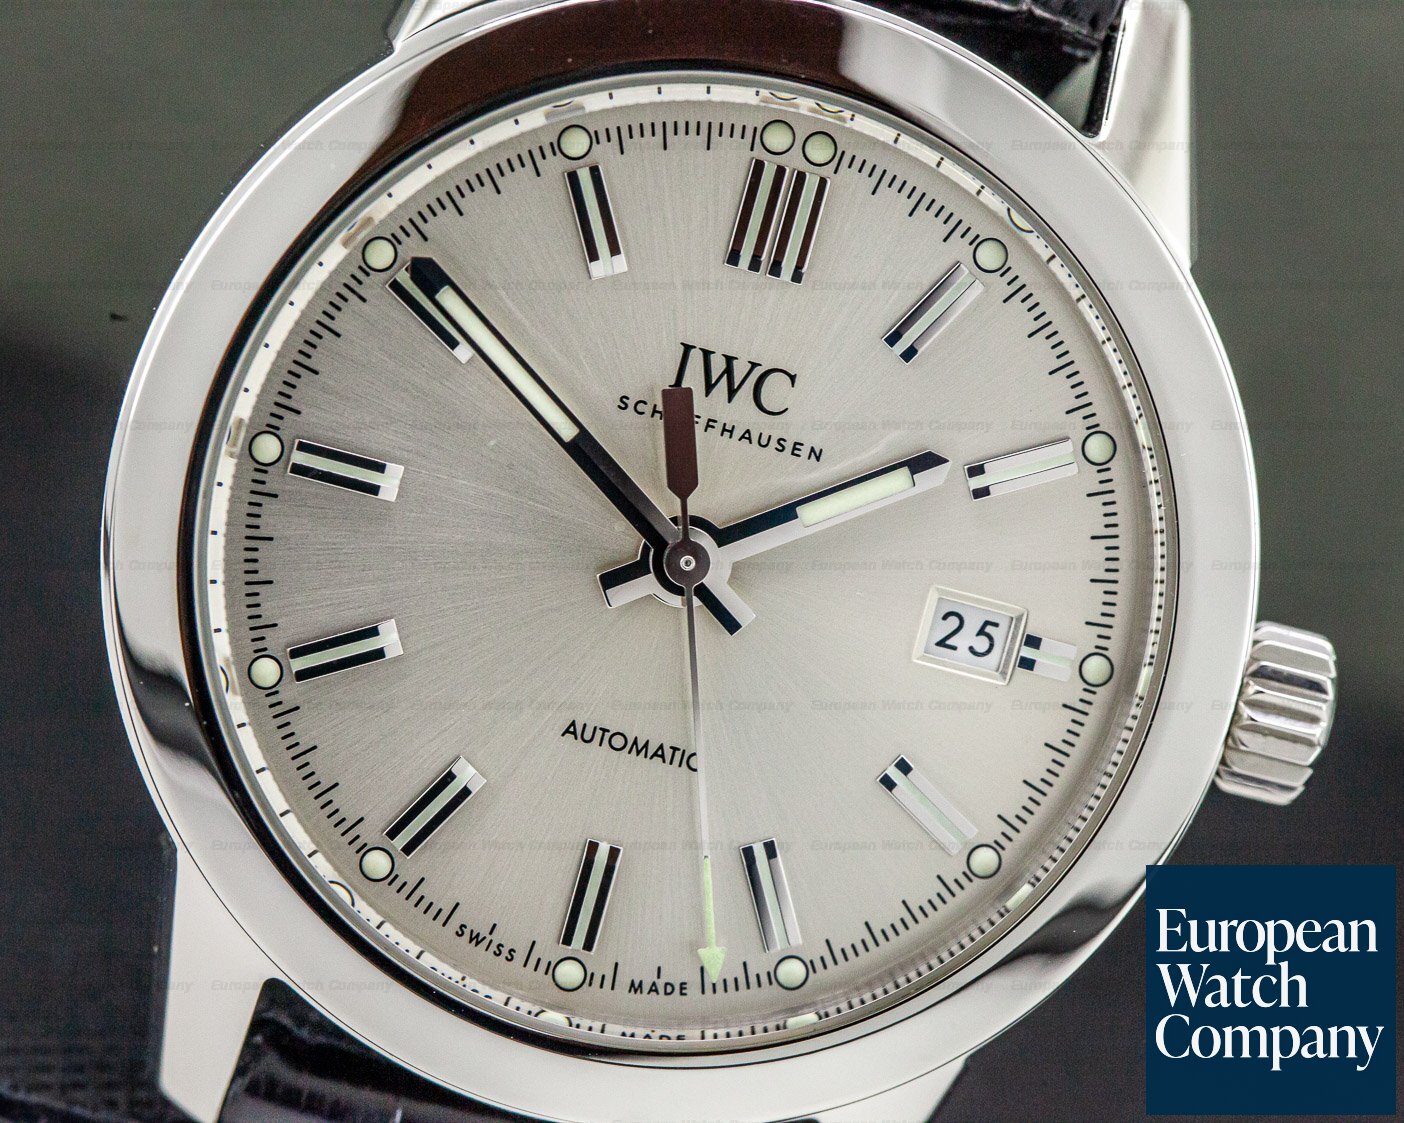 IWC Ingenieur Automatic SS Silver Dial Ref. IW357001